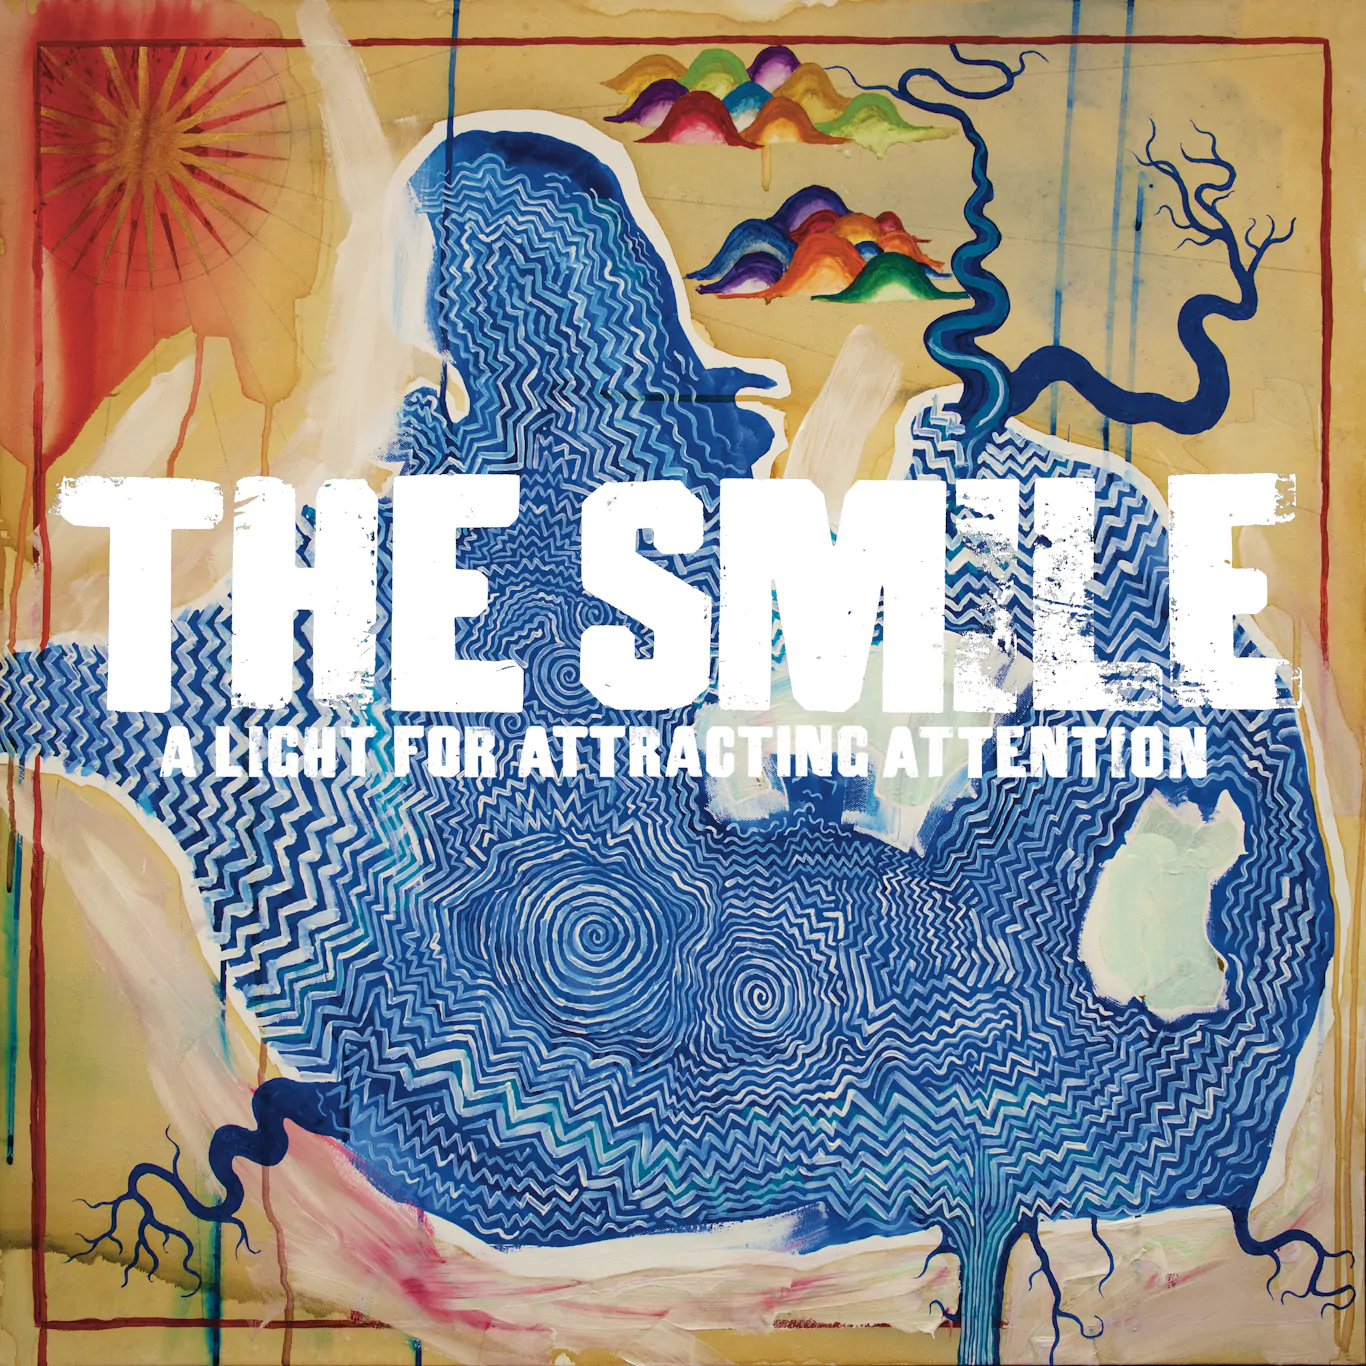 ALBUM REVIEW: The Smile – A Light For Attracting Attention